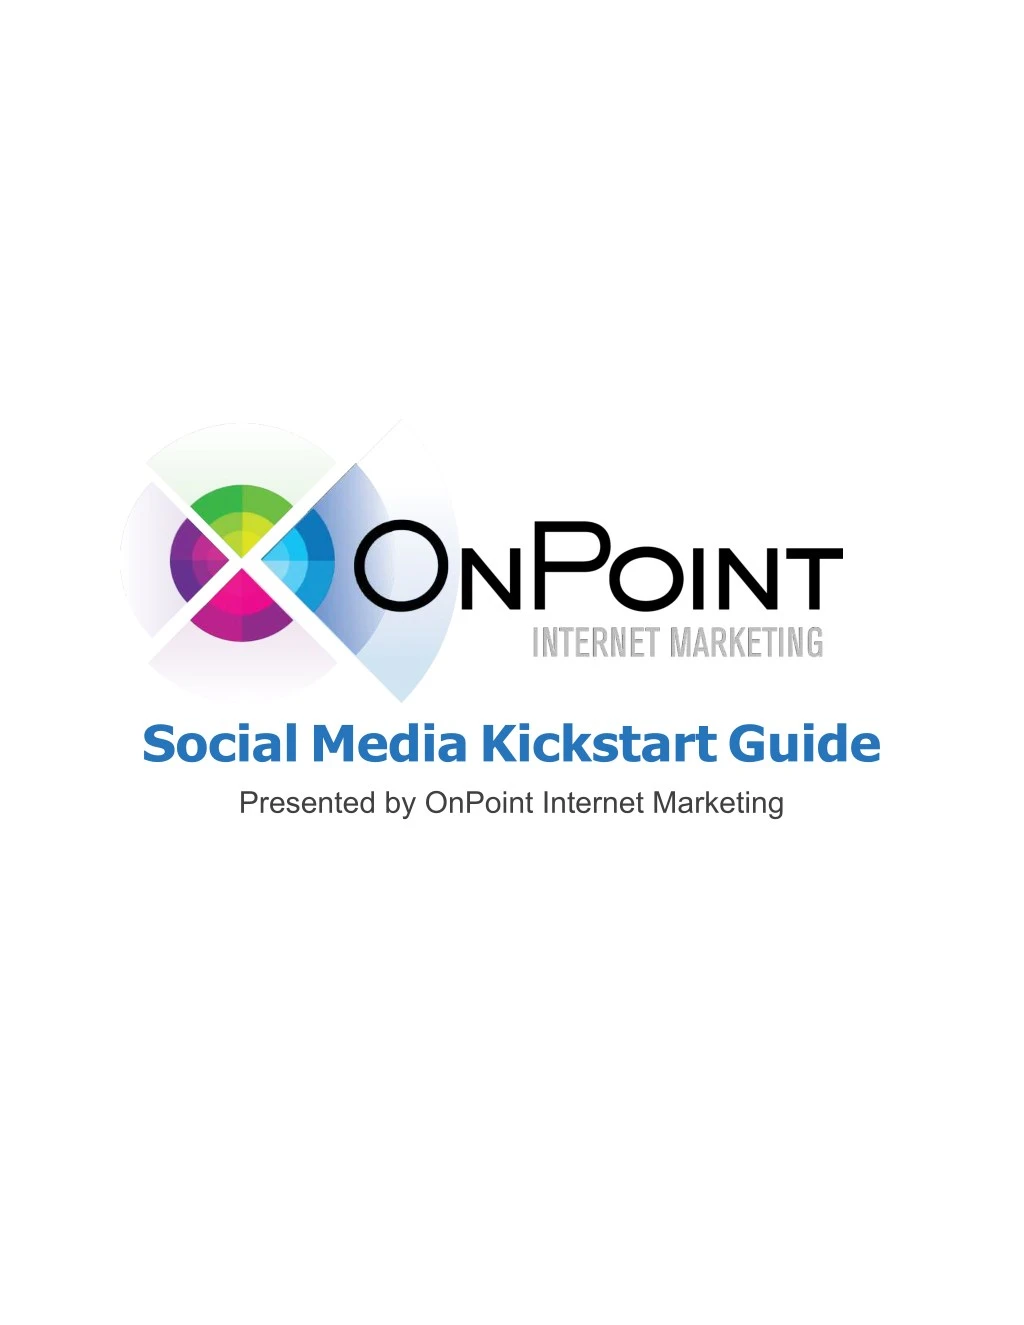 social media kickstart guide presented by onpoint